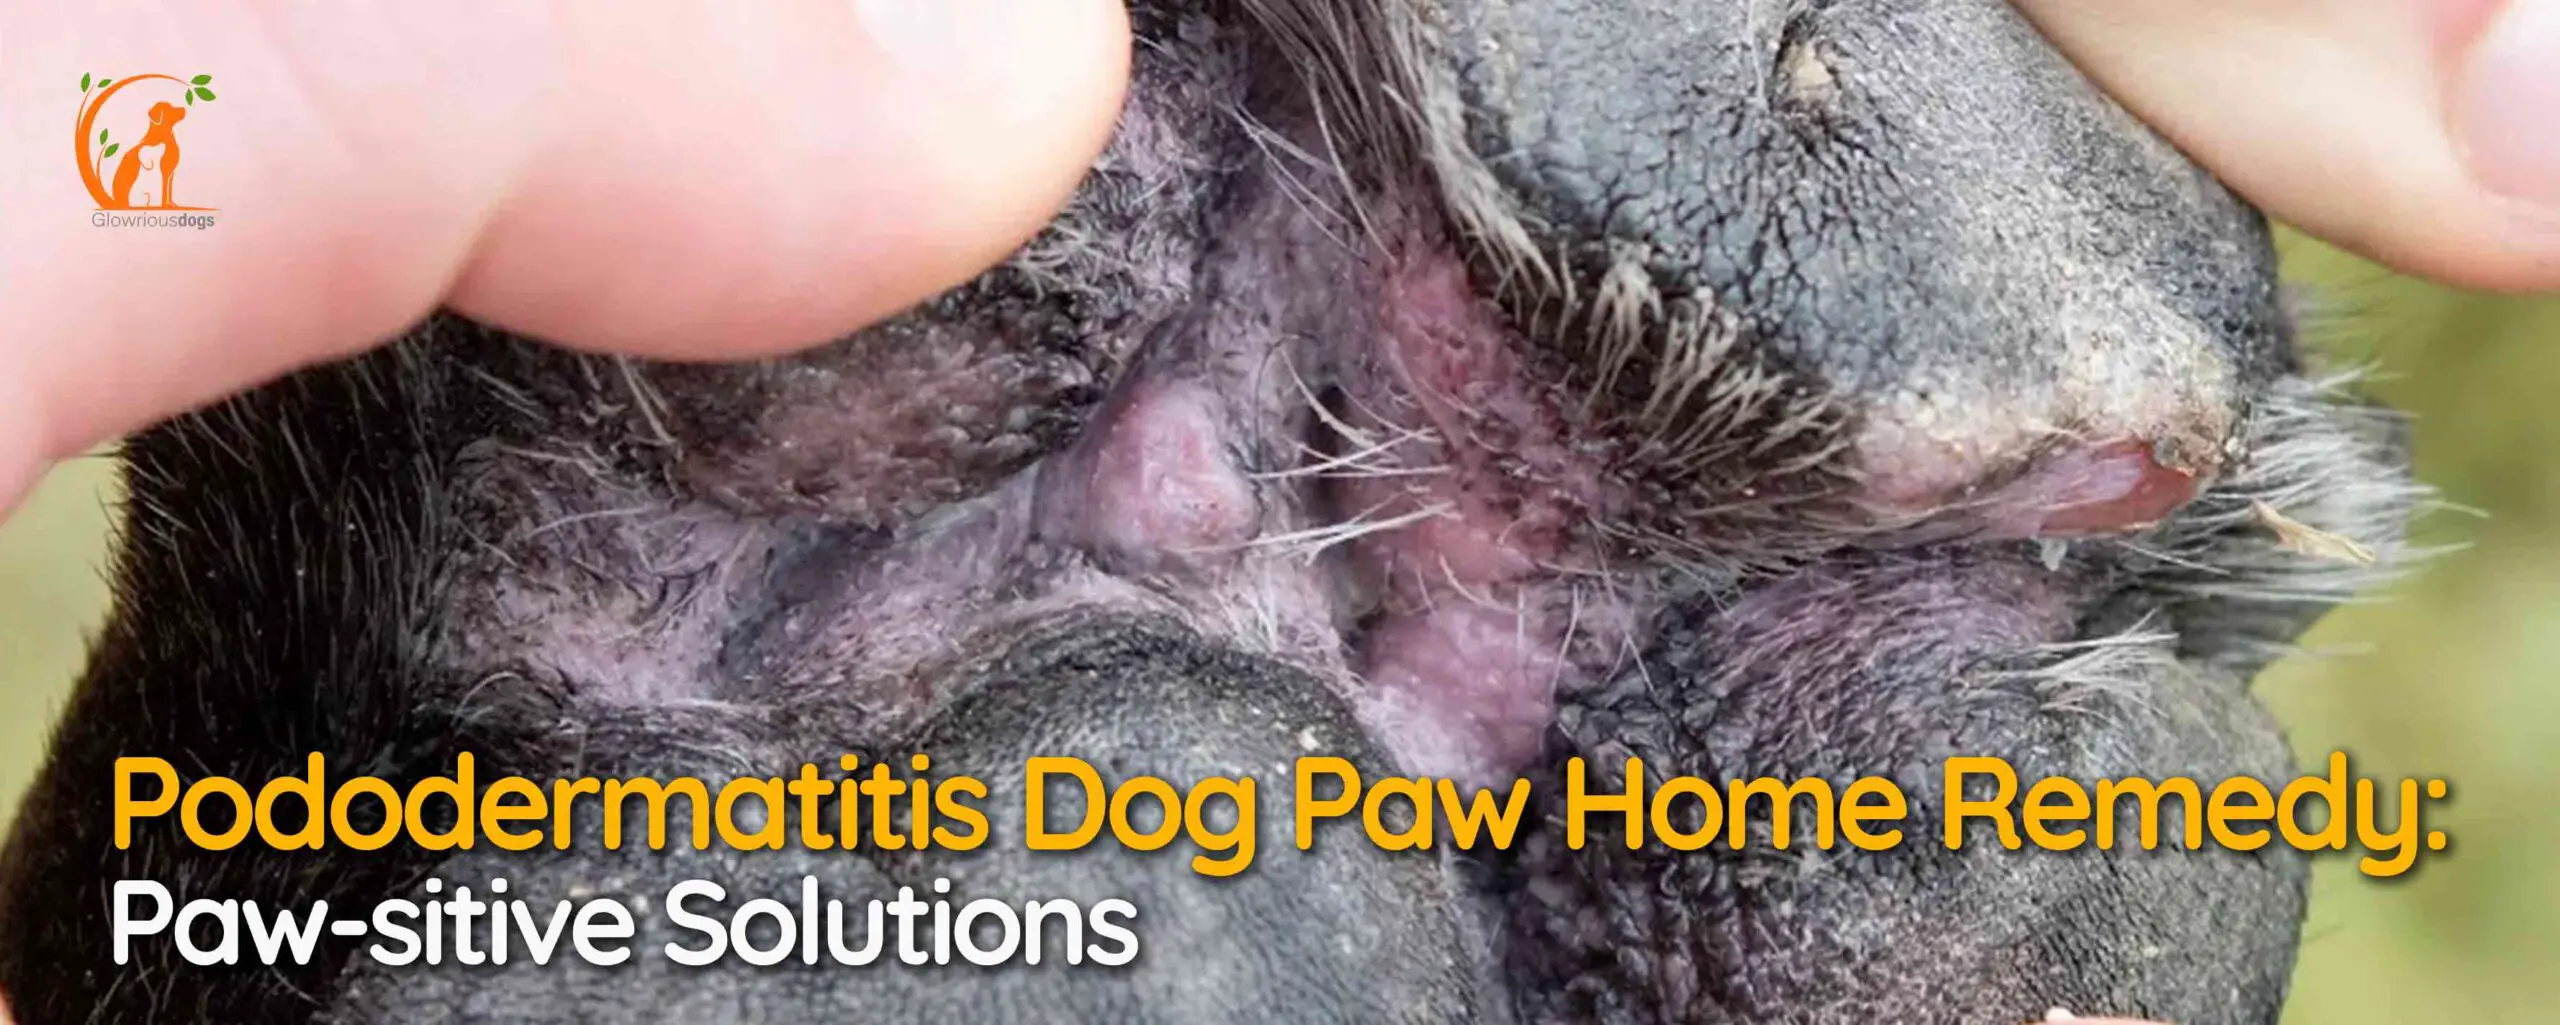 Pododermatitis Dog Paw Home Remedy: Paw-sitive Solutions